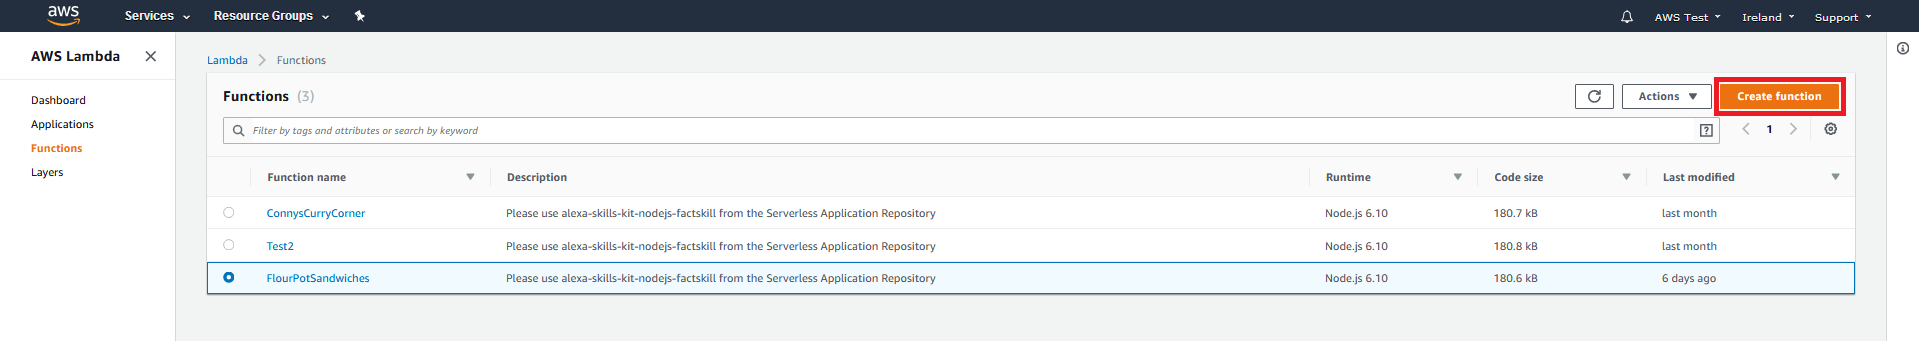 AWS Management Console: overview of Lambda functions already created (still empty).